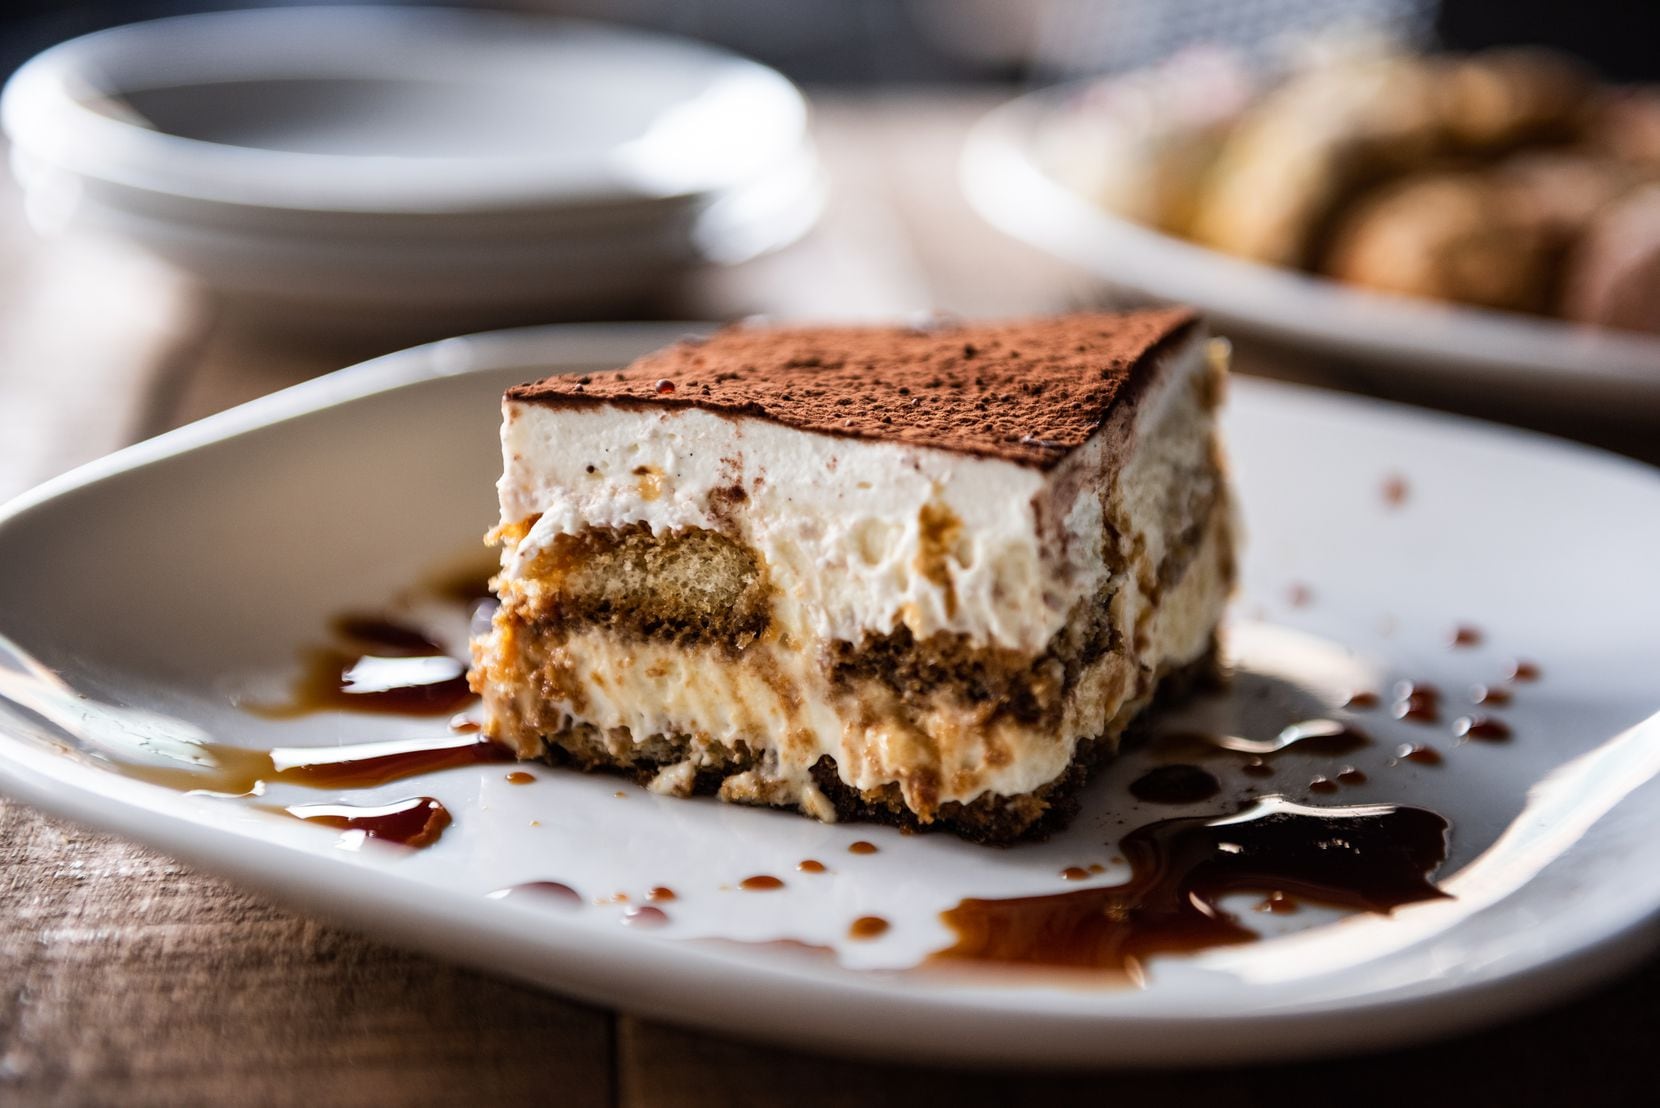 Princi Italia and Wine Bar is offering a Mother's Day menu that includes tiramisu.